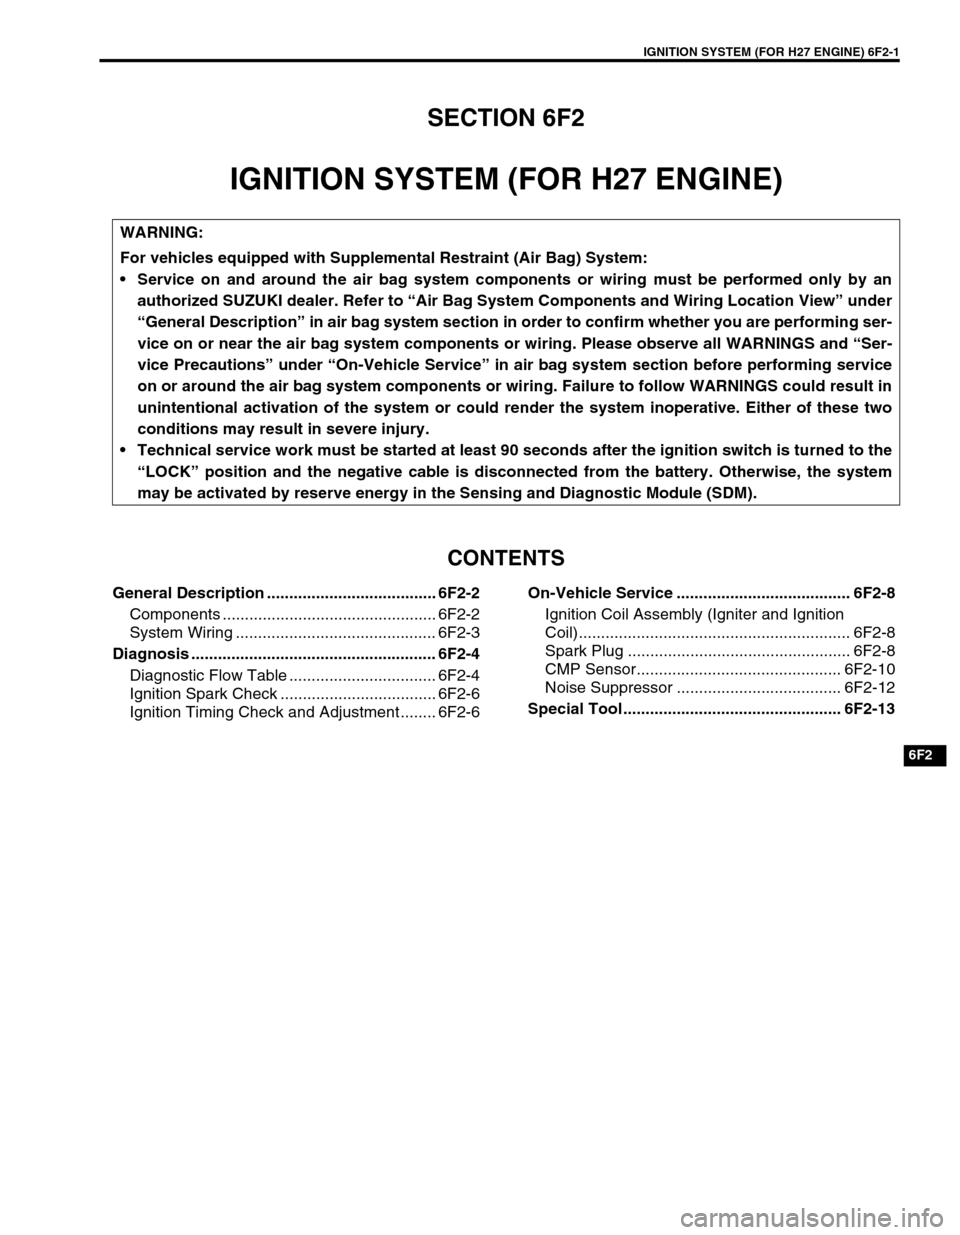 SUZUKI GRAND VITARA 2001 2.G Owners Manual IGNITION SYSTEM (FOR H27 ENGINE) 6F2-1
6F2
SECTION 6F2
IGNITION SYSTEM (FOR H27 ENGINE)
CONTENTS
General Description ...................................... 6F2-2
Components ...........................